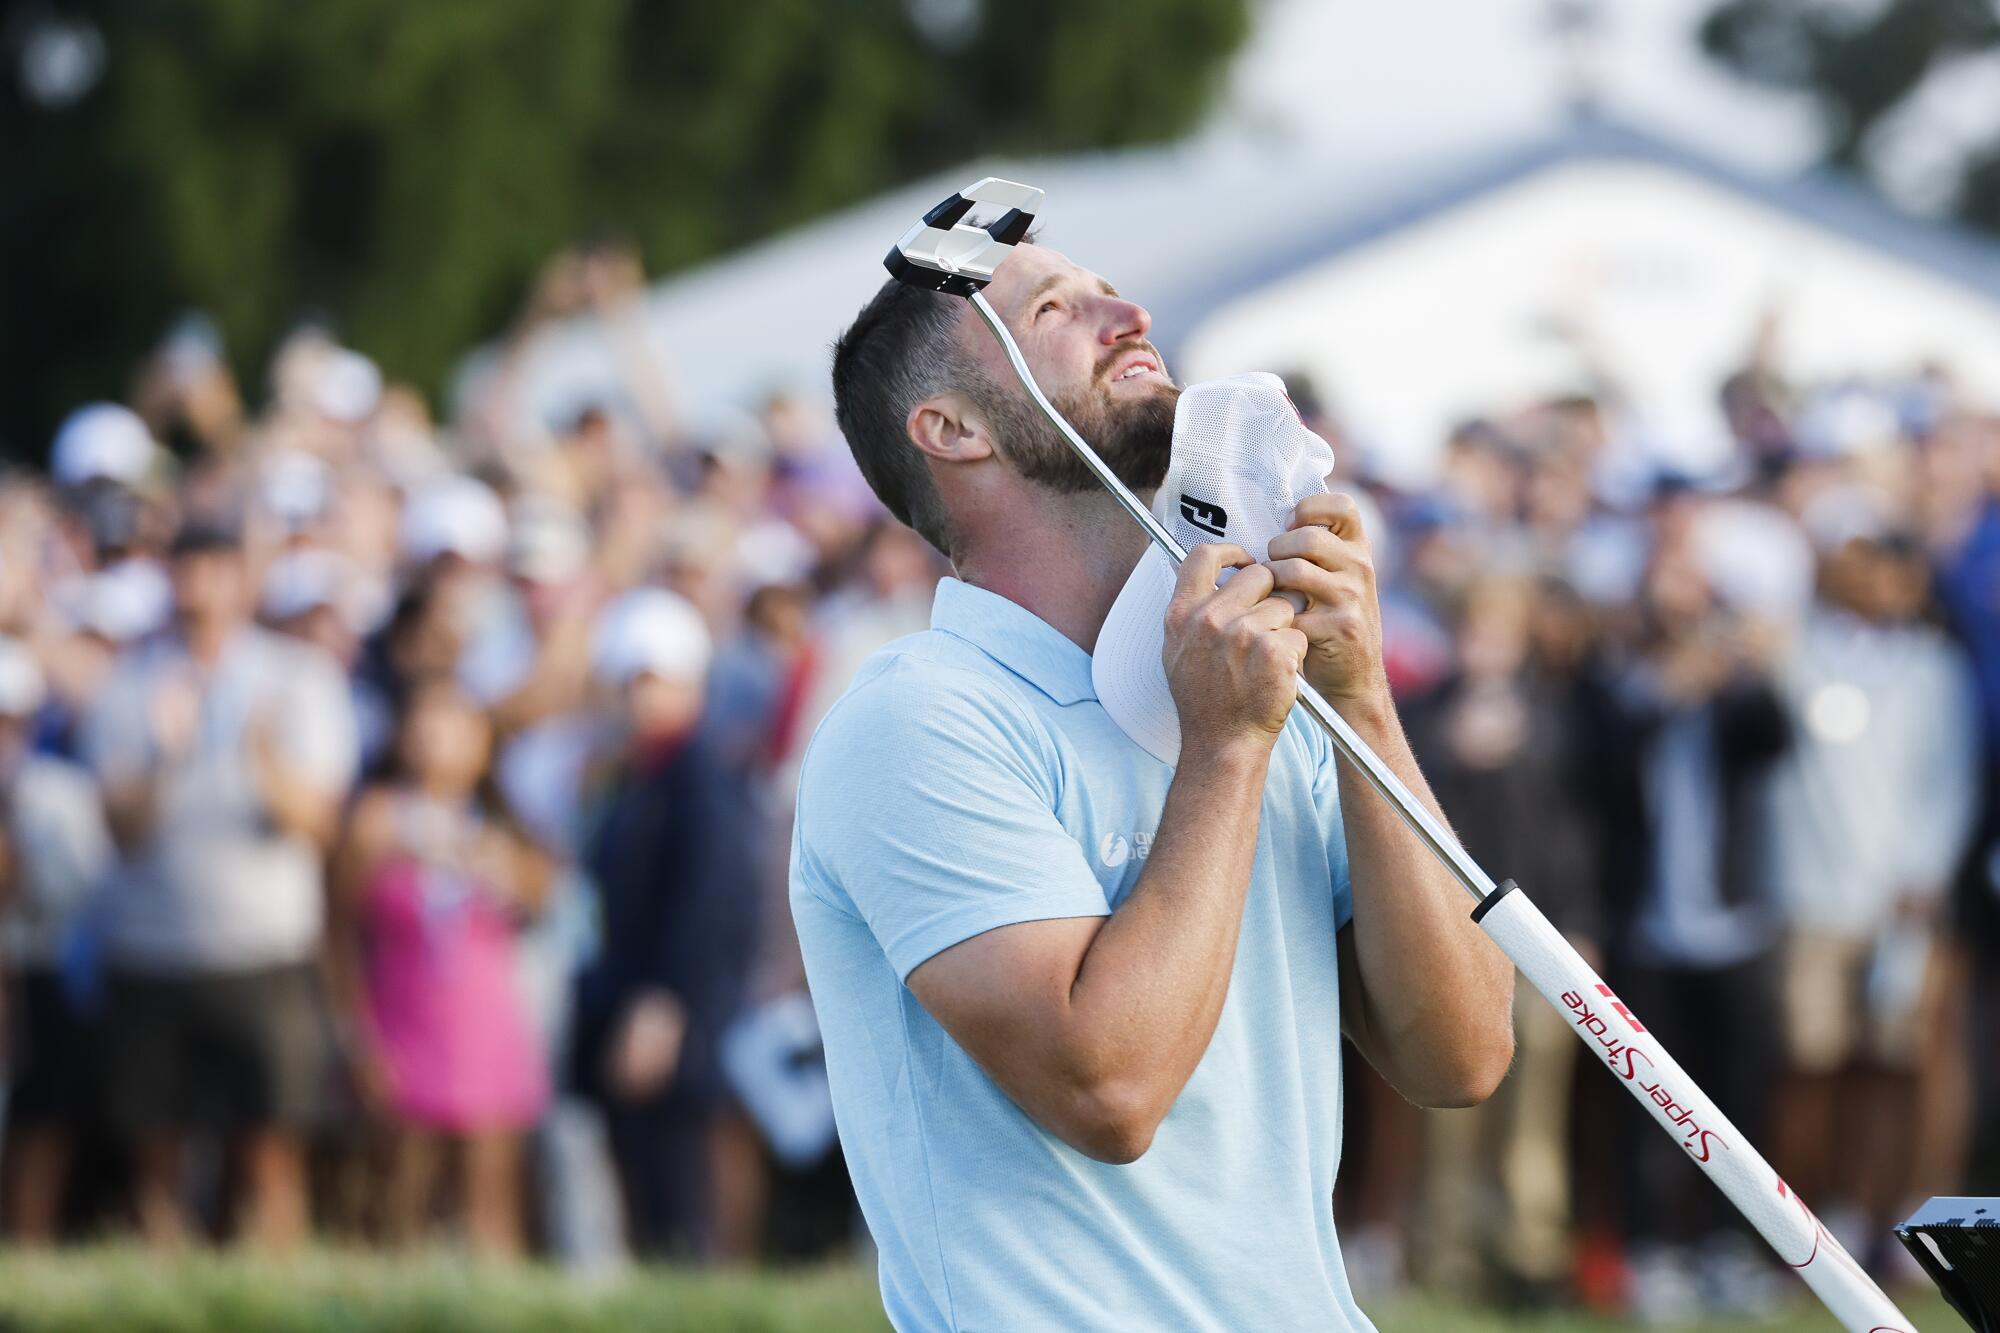 Wyndham Clark celebrates on the 18th green after winning the U.S. Open at Los Angeles Country Club.